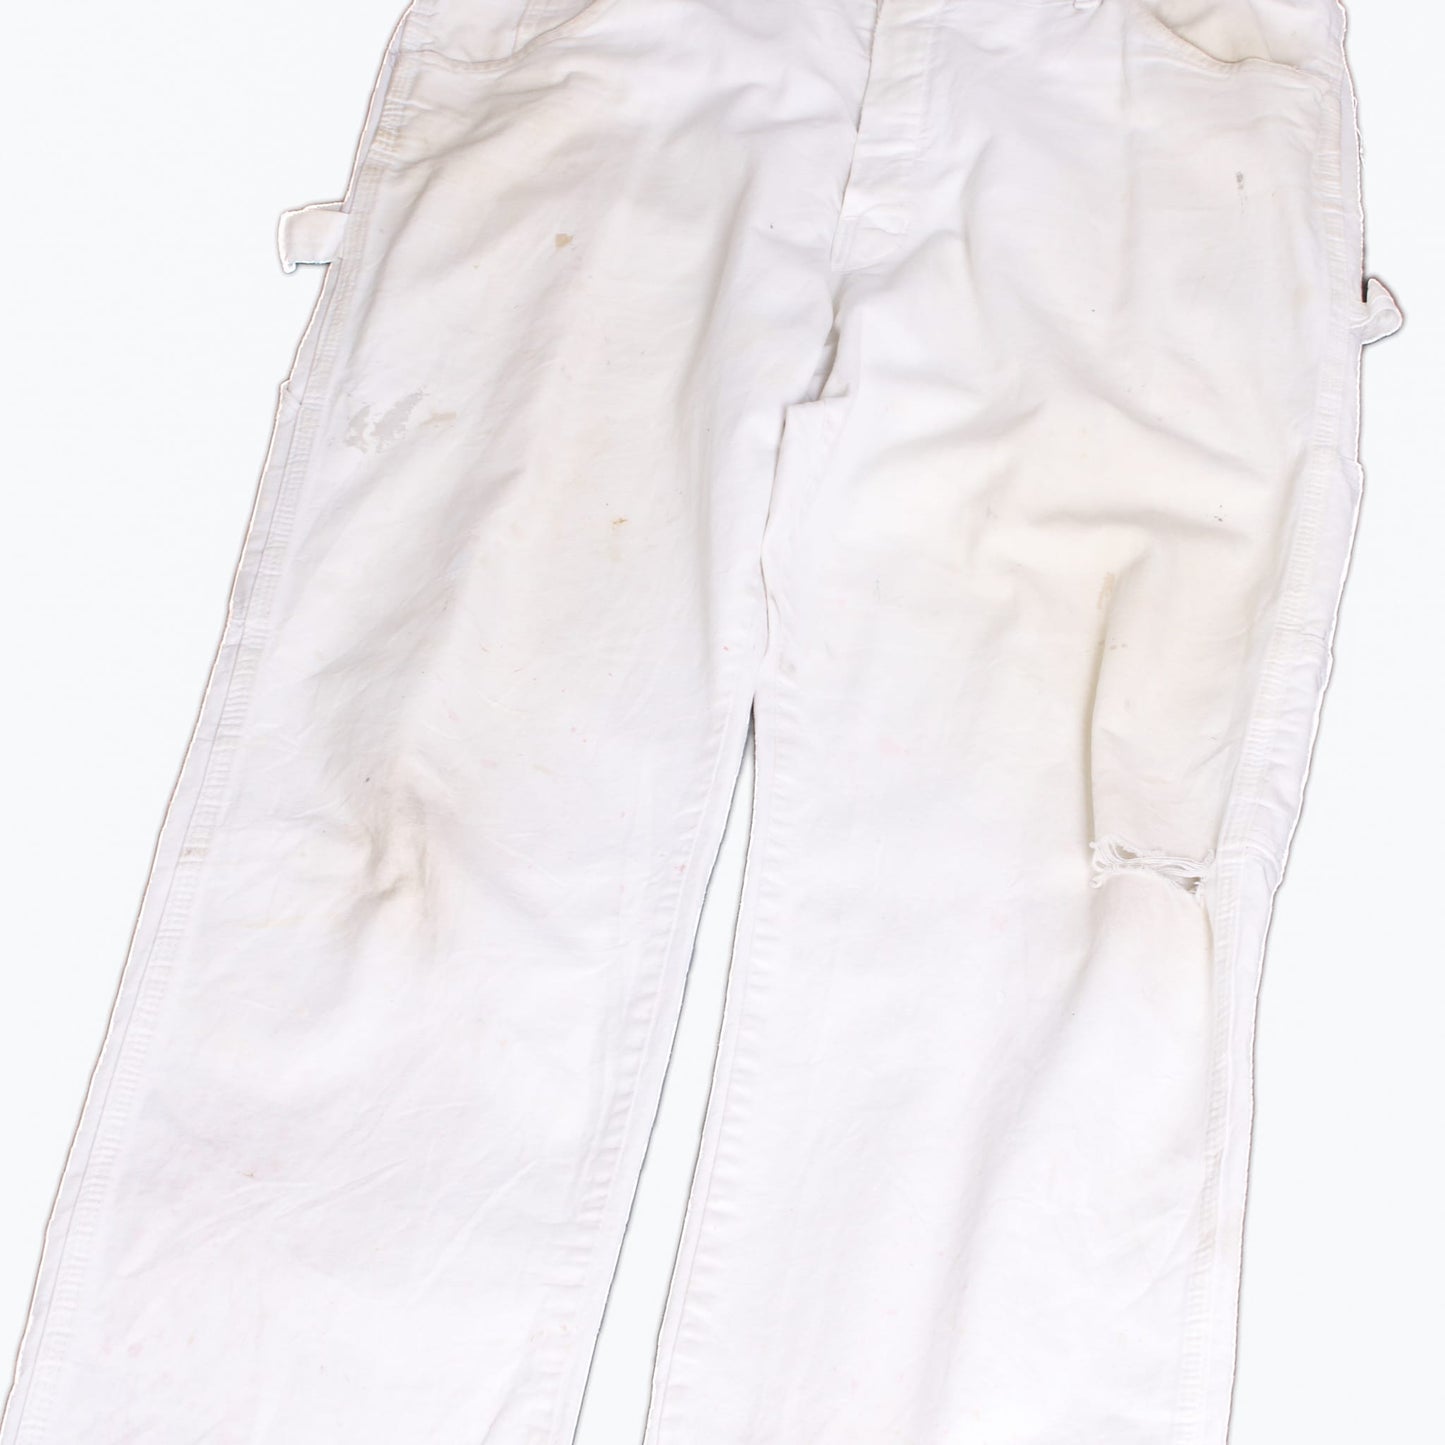 Vintage Dickies Carpenter Pants - White - 36/30 - American Madness